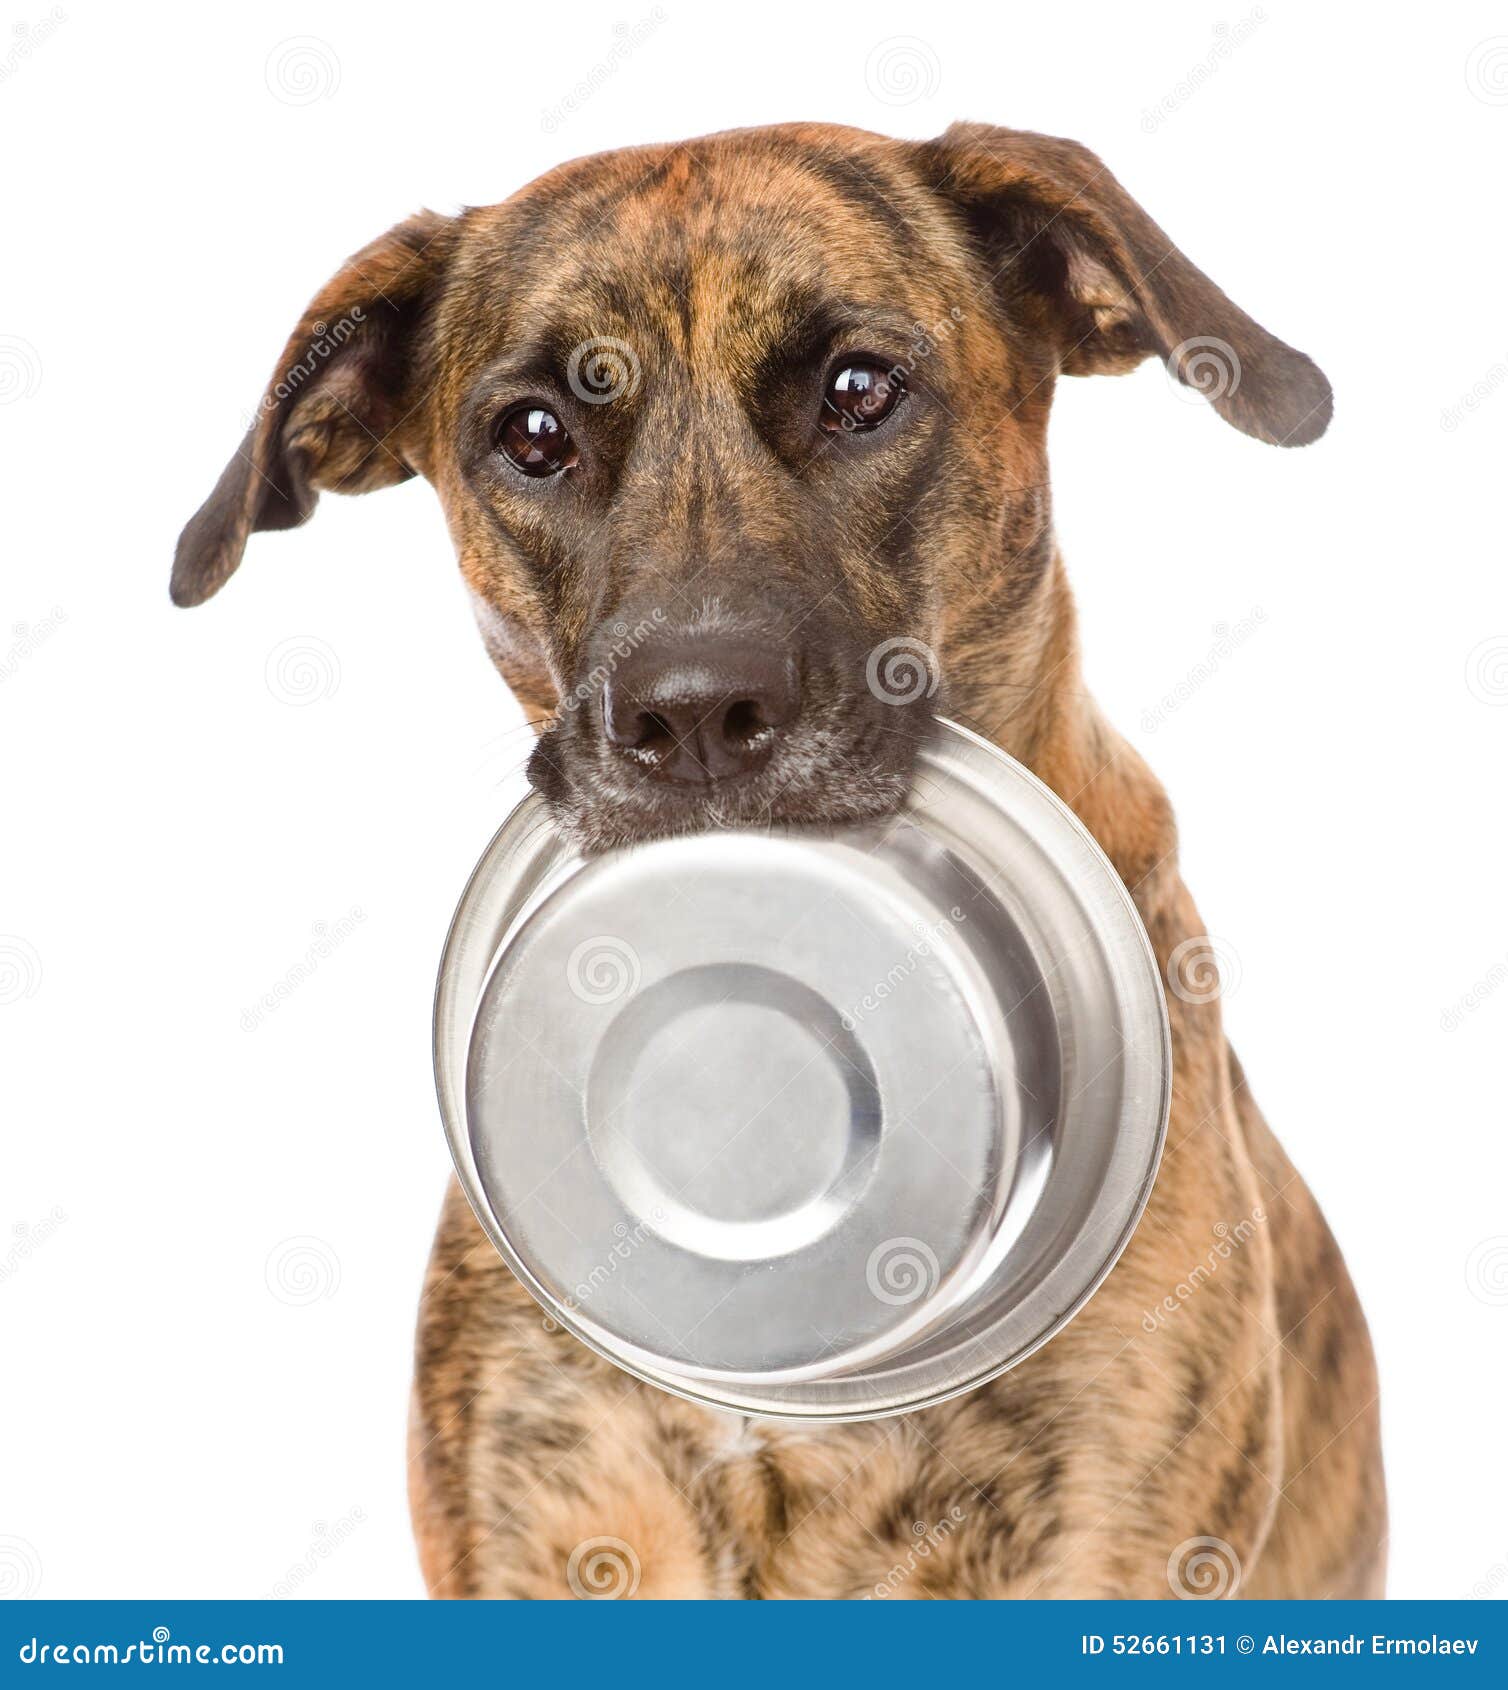 dog holding bowl in mouth.  on white background